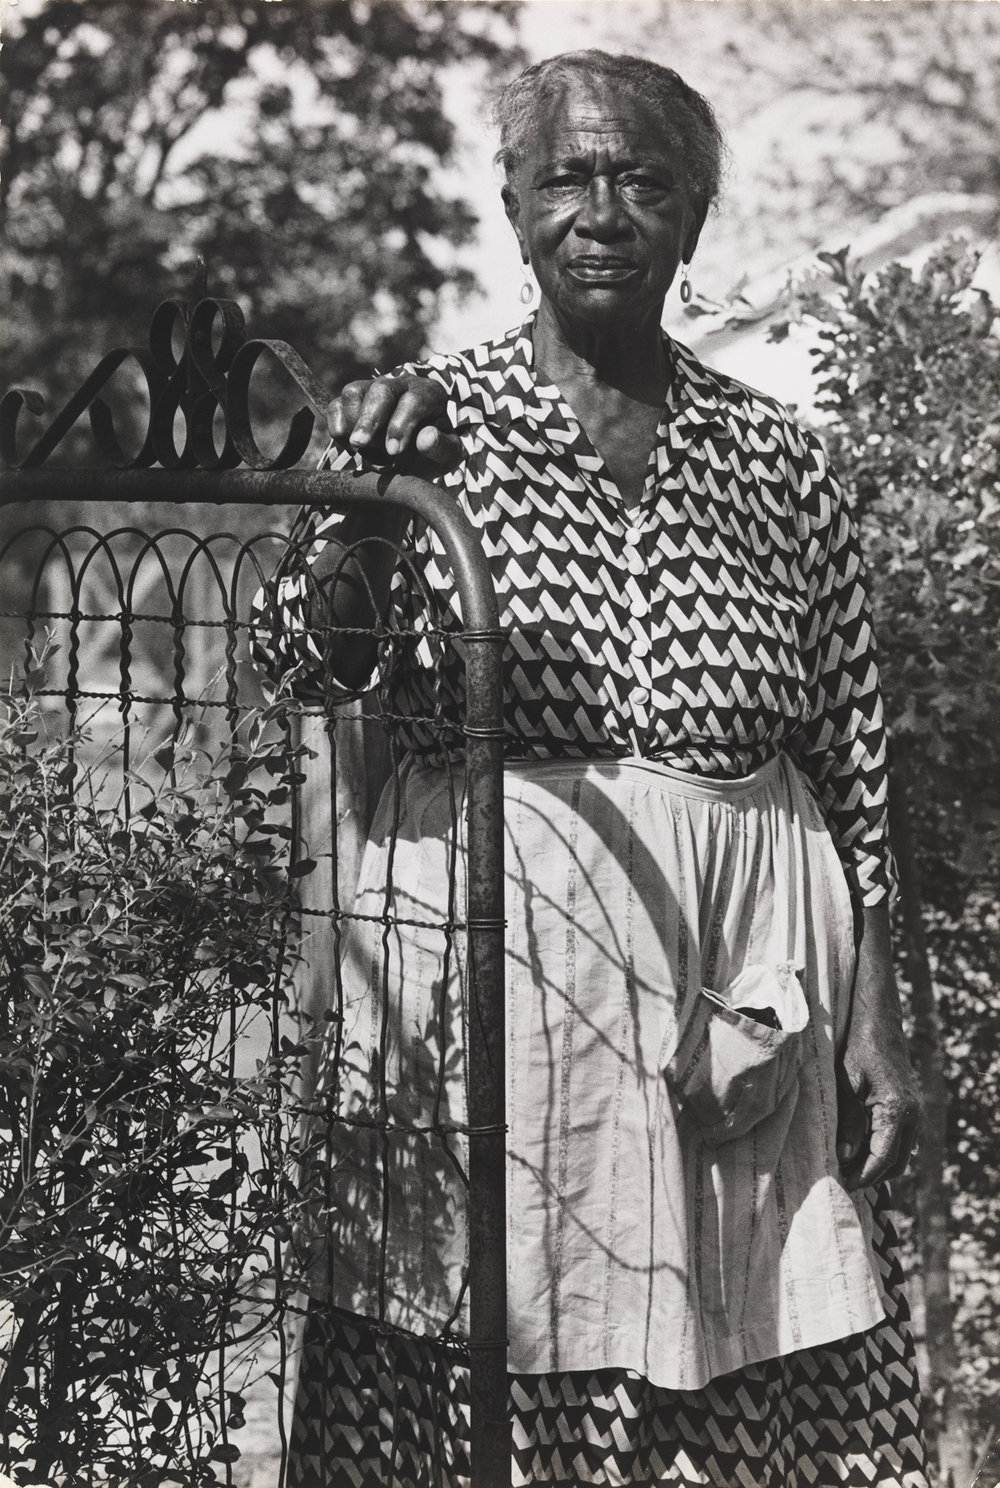   Chester Higgins ,&nbsp;  T   he Artist's Great-Aunt Shugg Lampley, New Brockton, Alabama, 1968   Gelatin silver print, 9¾”H × 6⅝”W  Virginia Museum of Fine Arts, Richmond, National Endowment for the Arts Fund for American Art 